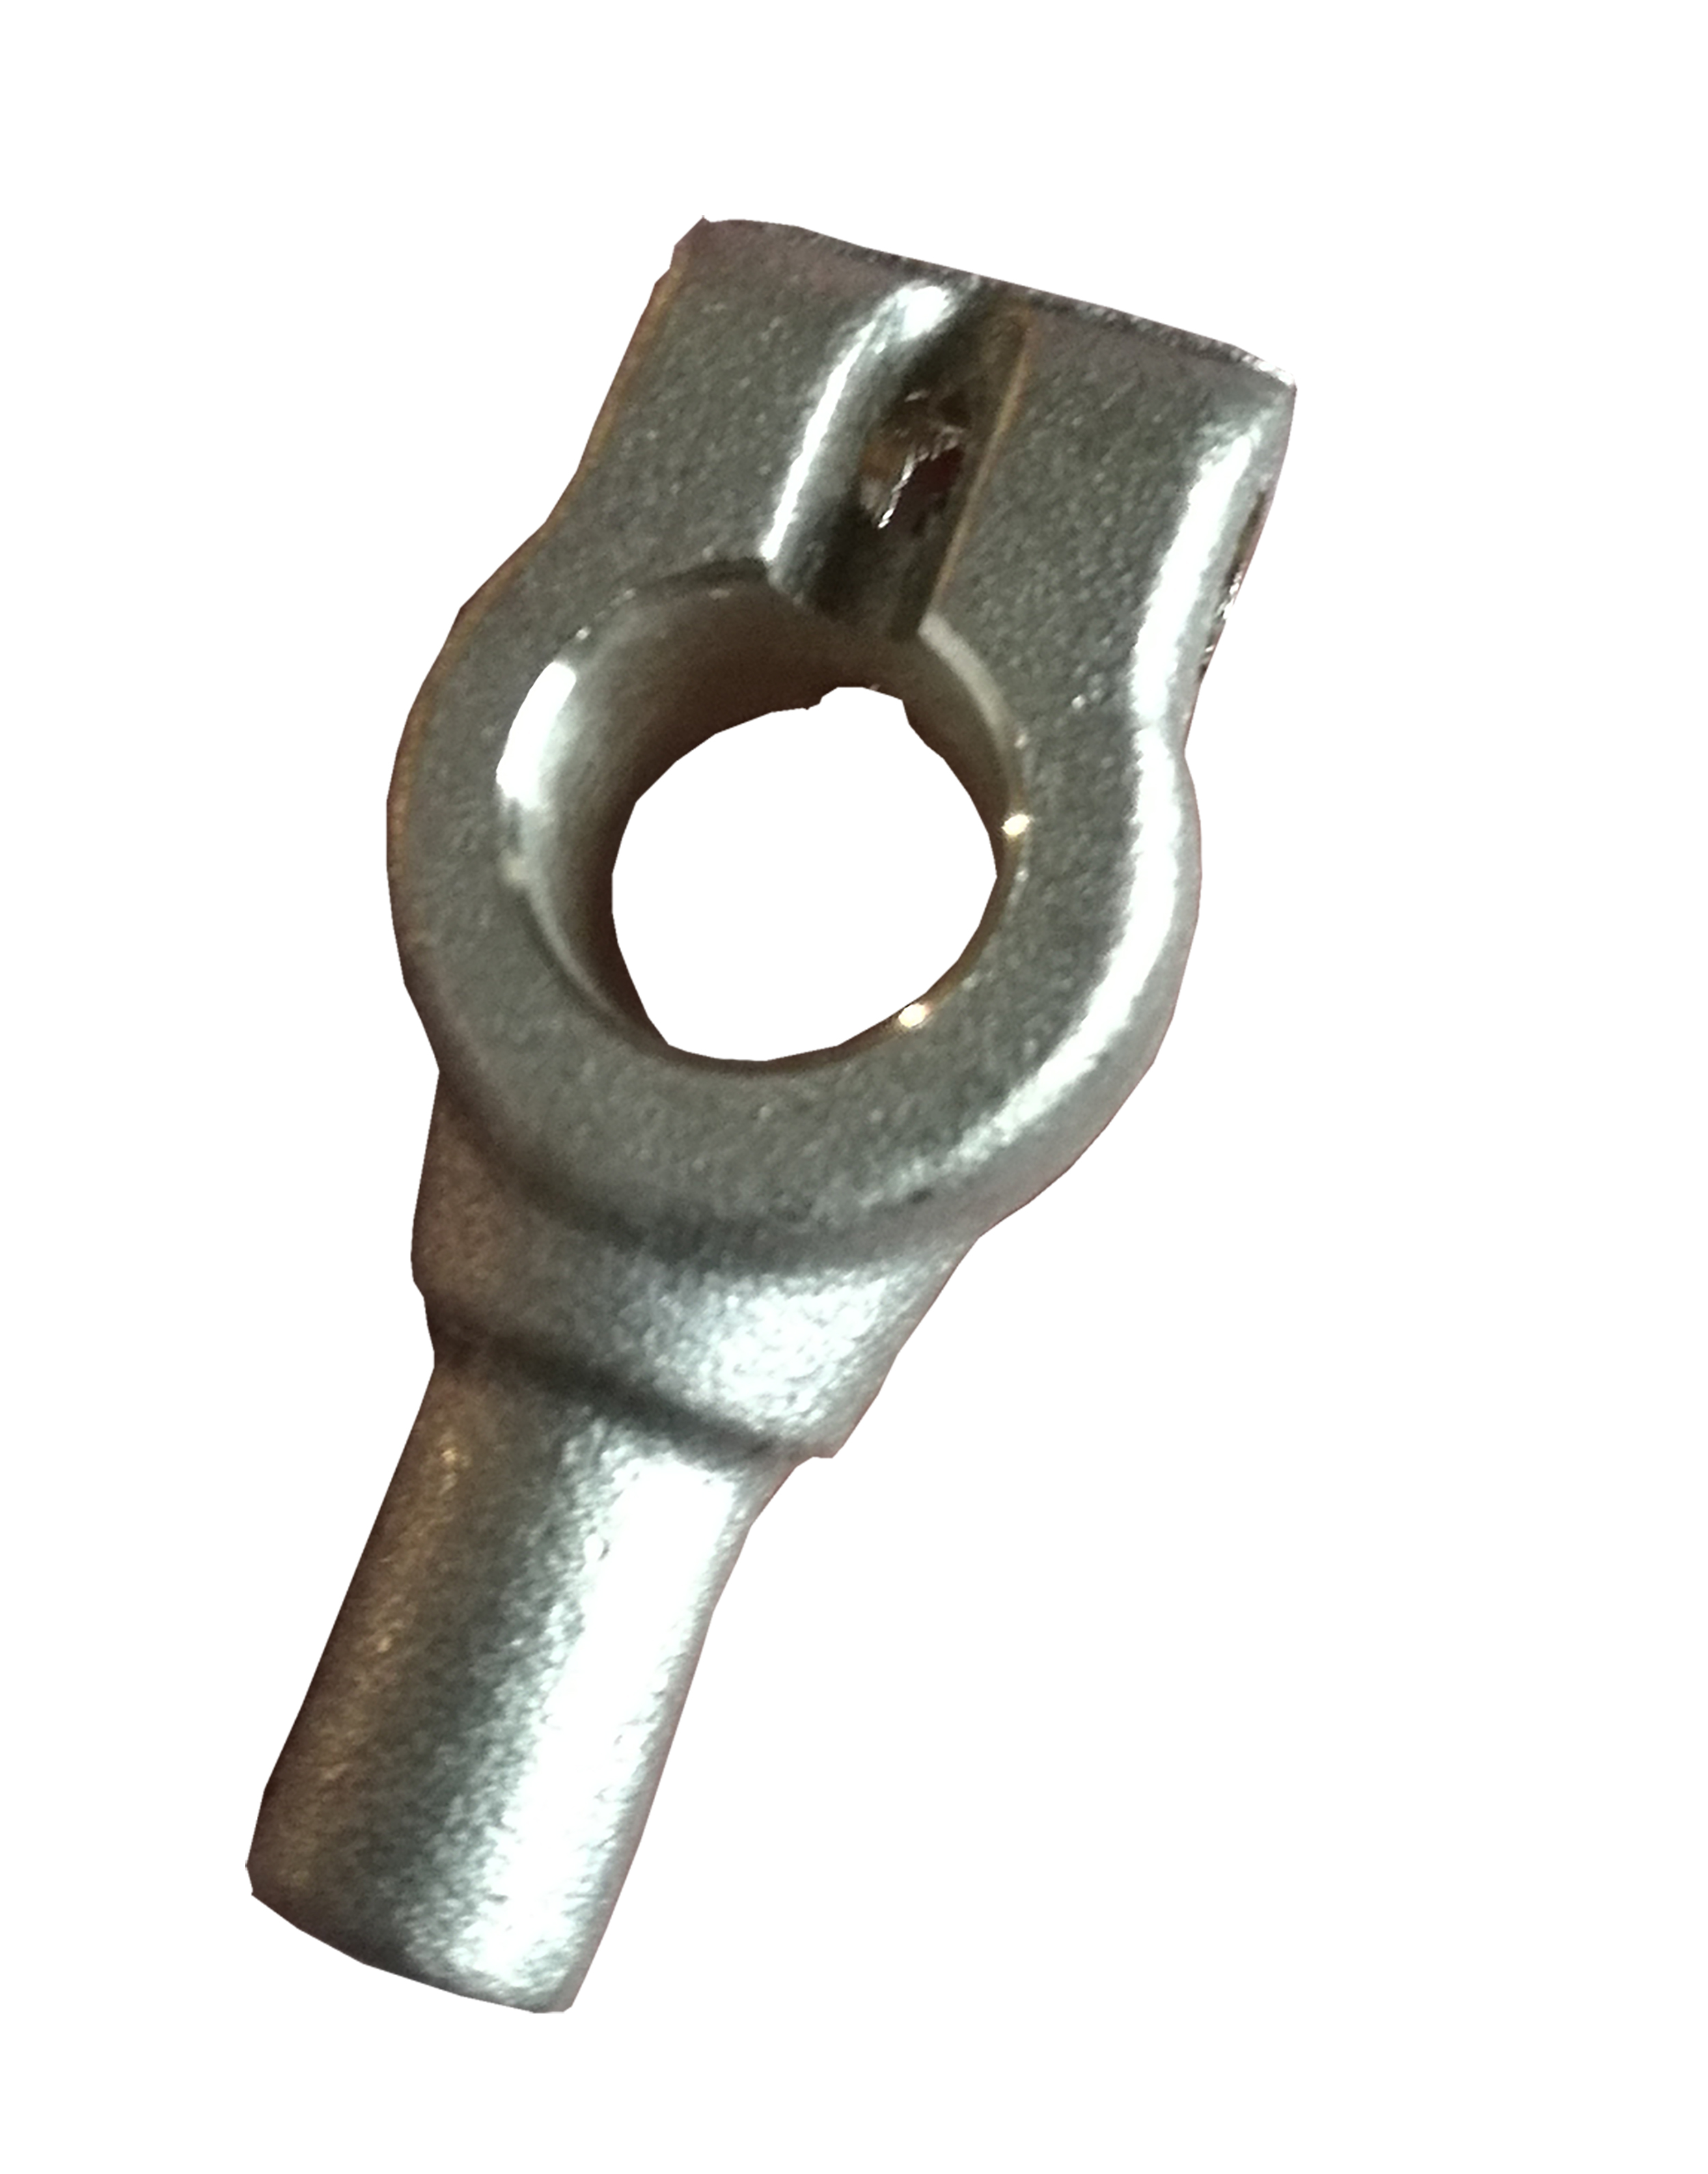 China Gold Supplier for Cast Iron Supplier - Brass casting    C86700, LG2, G1, G-cuSn5ZnPb, G-CuPb20Sn  – Neuland Metals